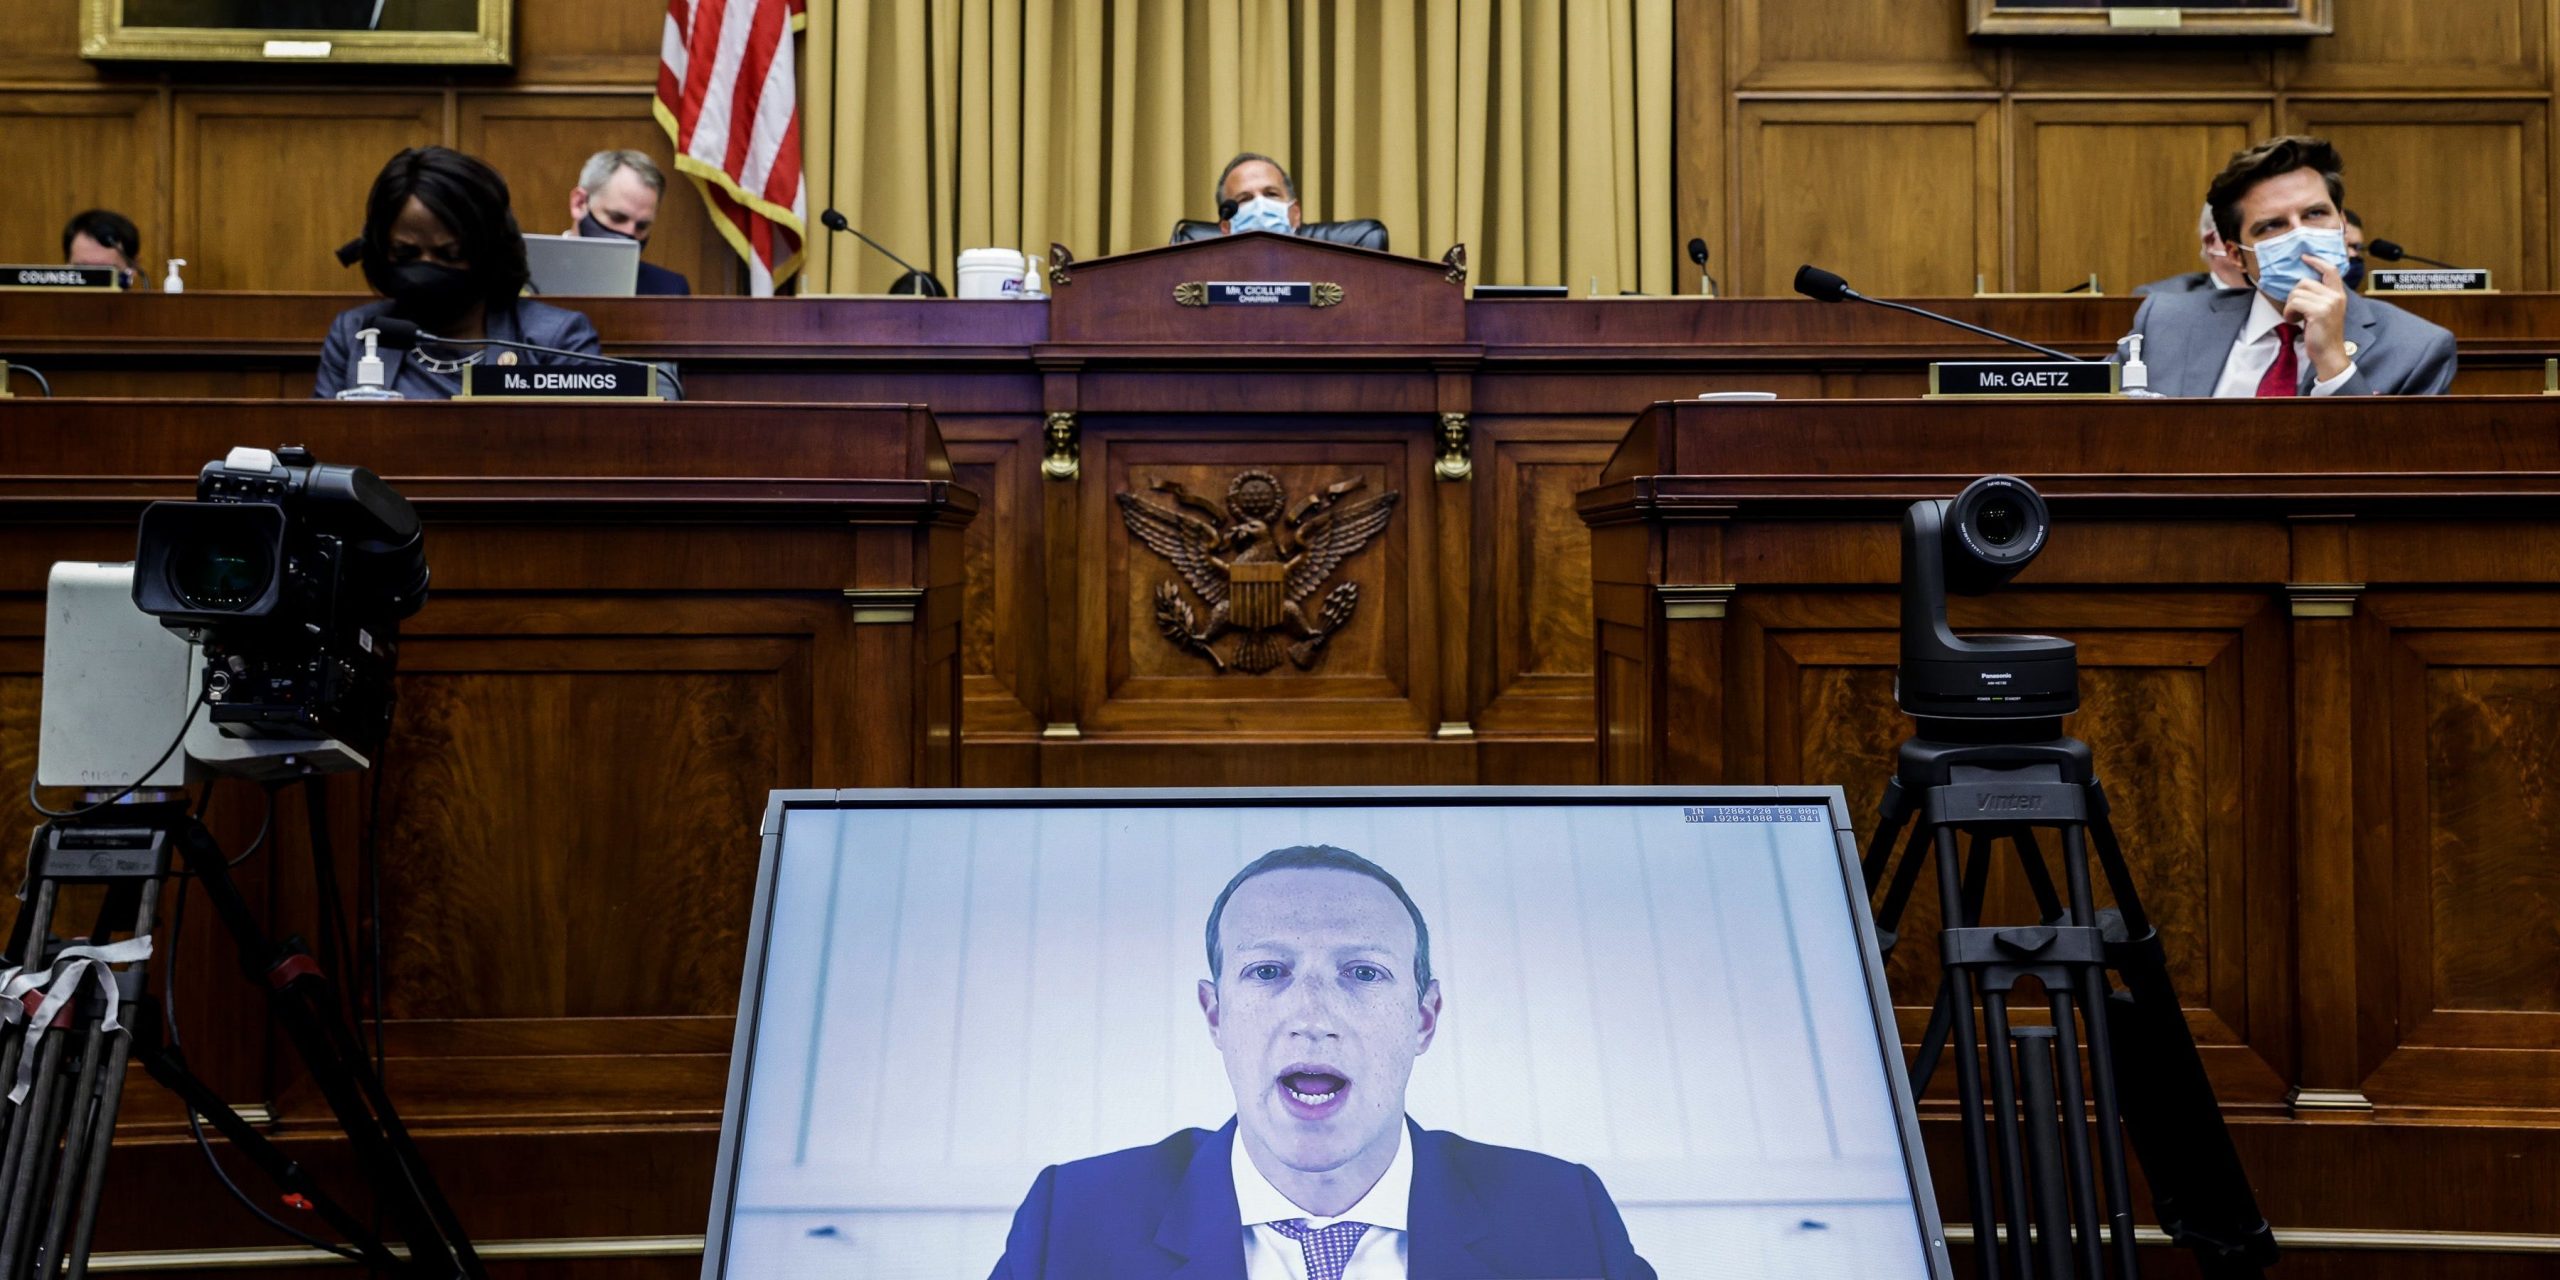 Facebook CEO Mark Zuckerberg testifies before the House Judiciary Subcommittee on Antitrust, Commercial and Administrative Law on "Online Platforms and Market Power" in the Rayburn House office Building on Capitol Hill in Washington, DC on July 29, 2020.